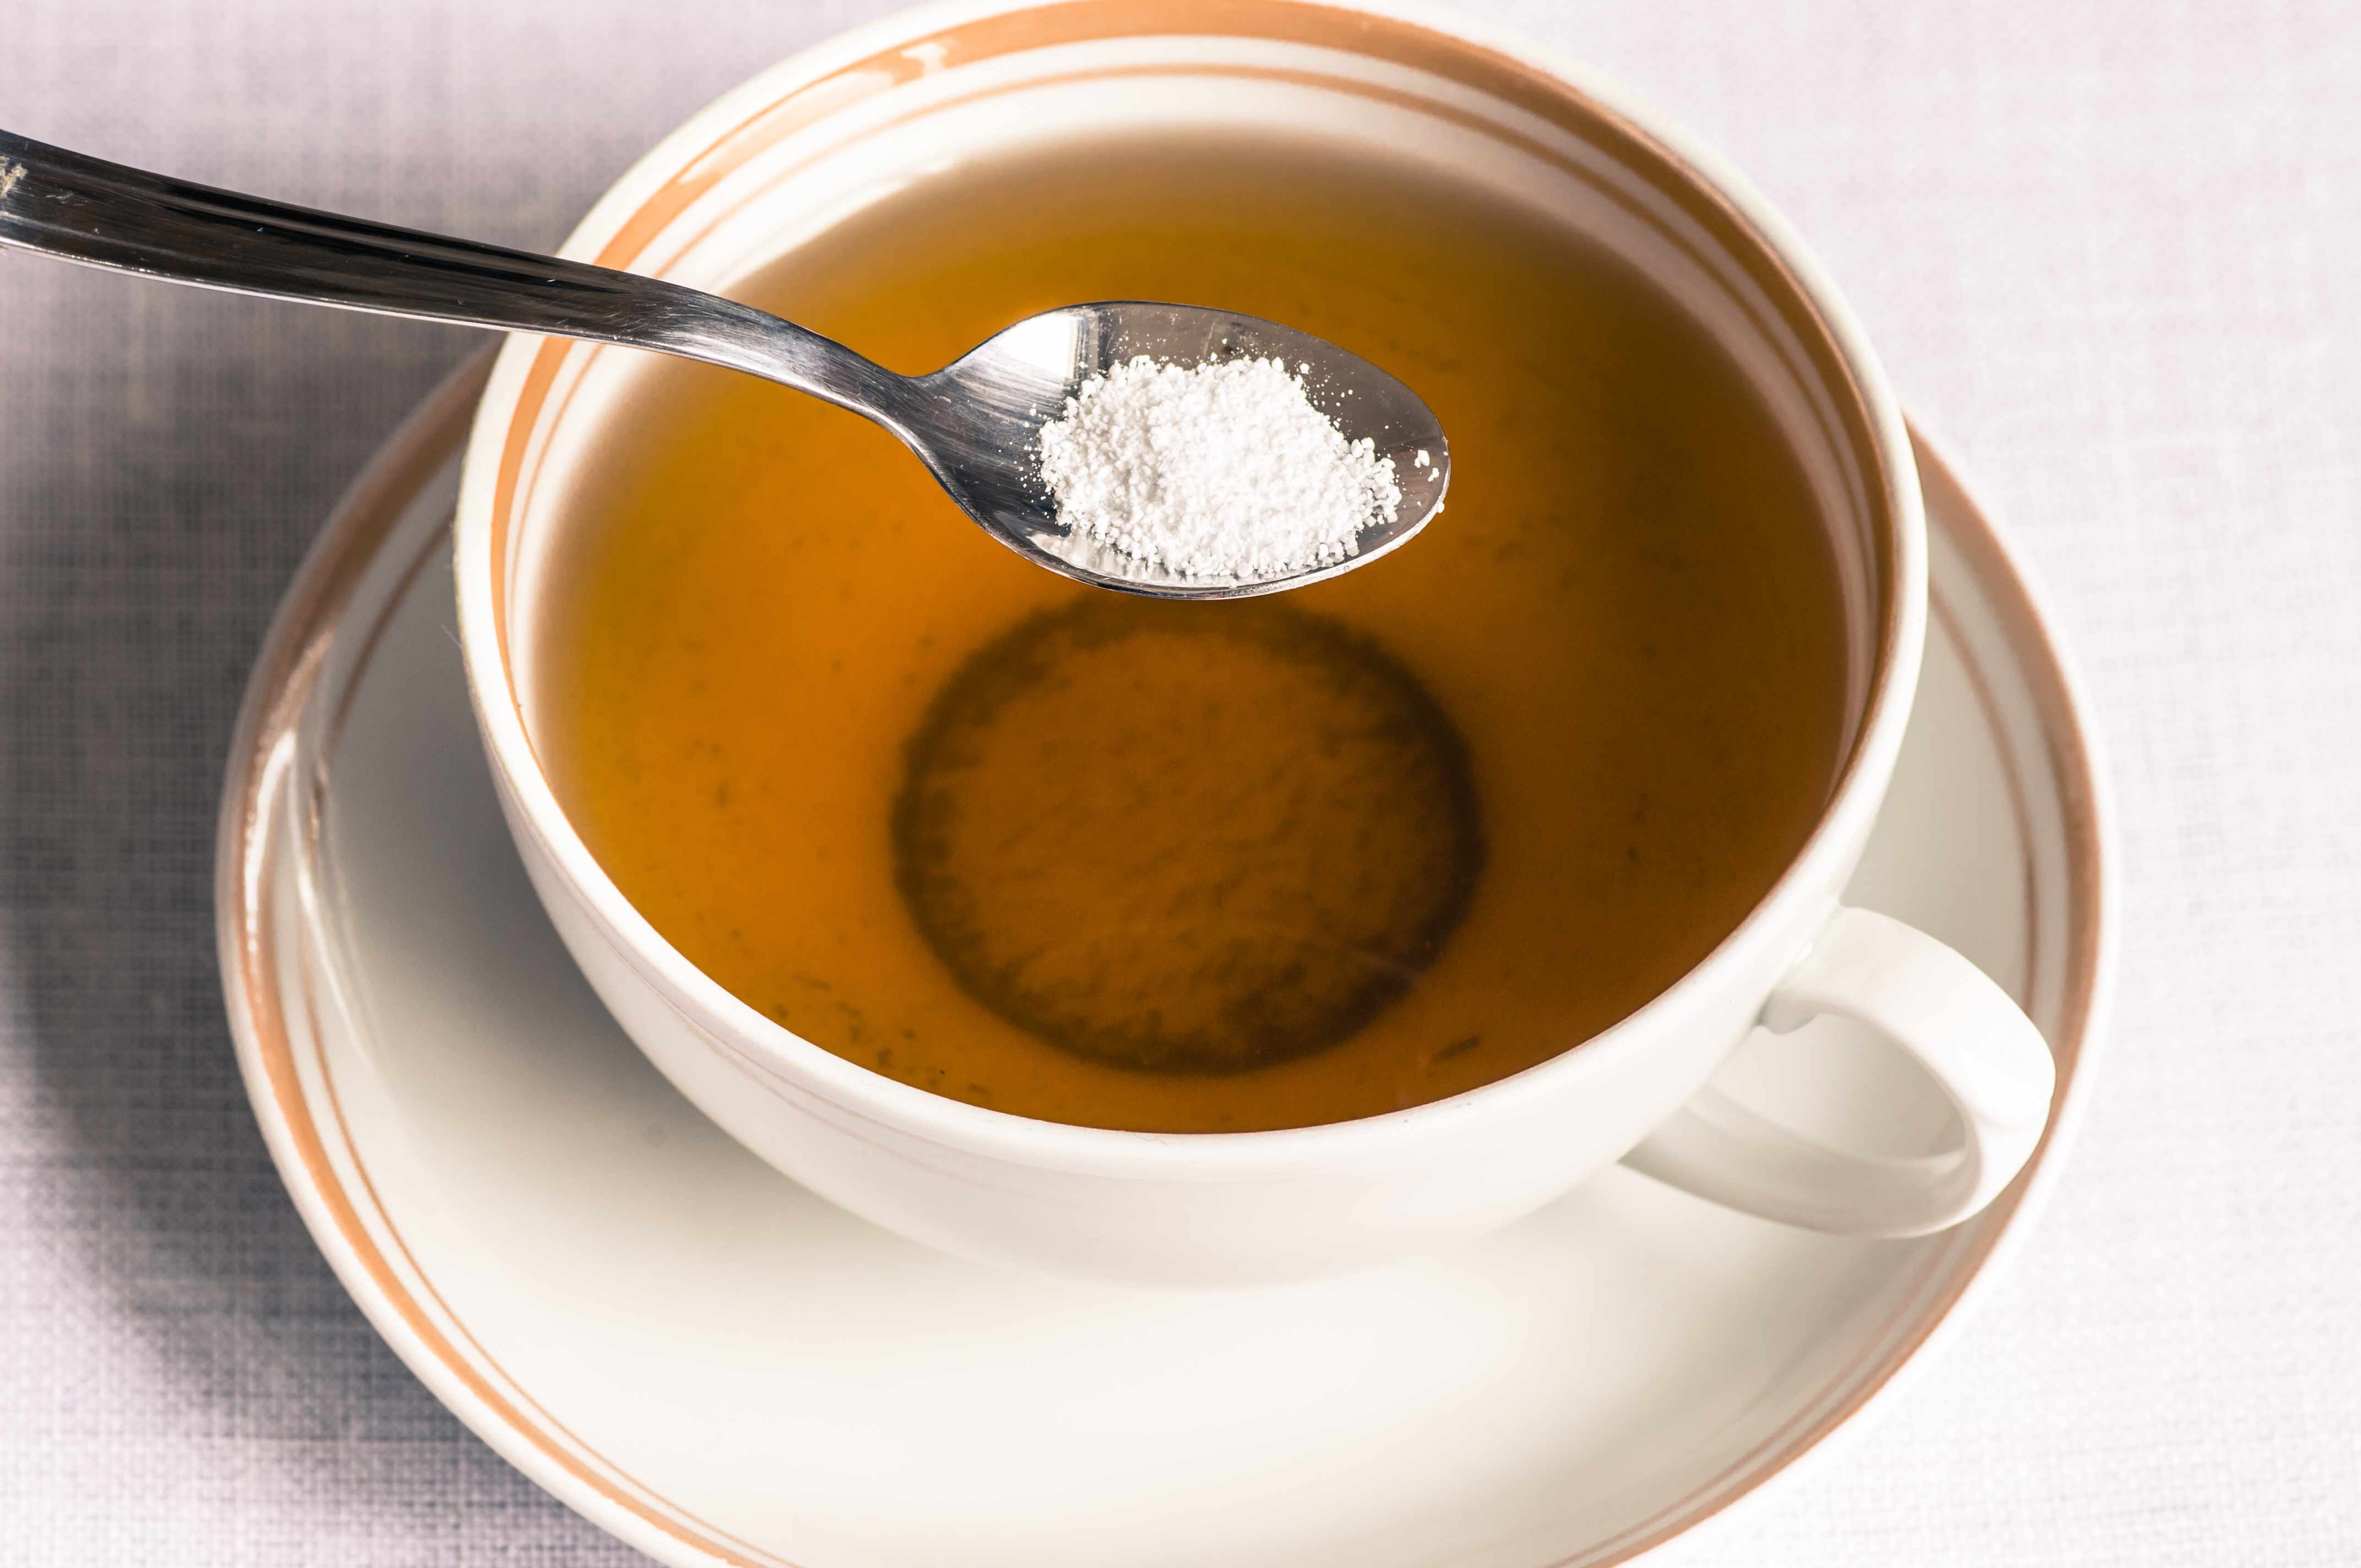 a spoonful of artificial sweetener being put in a cup of tea